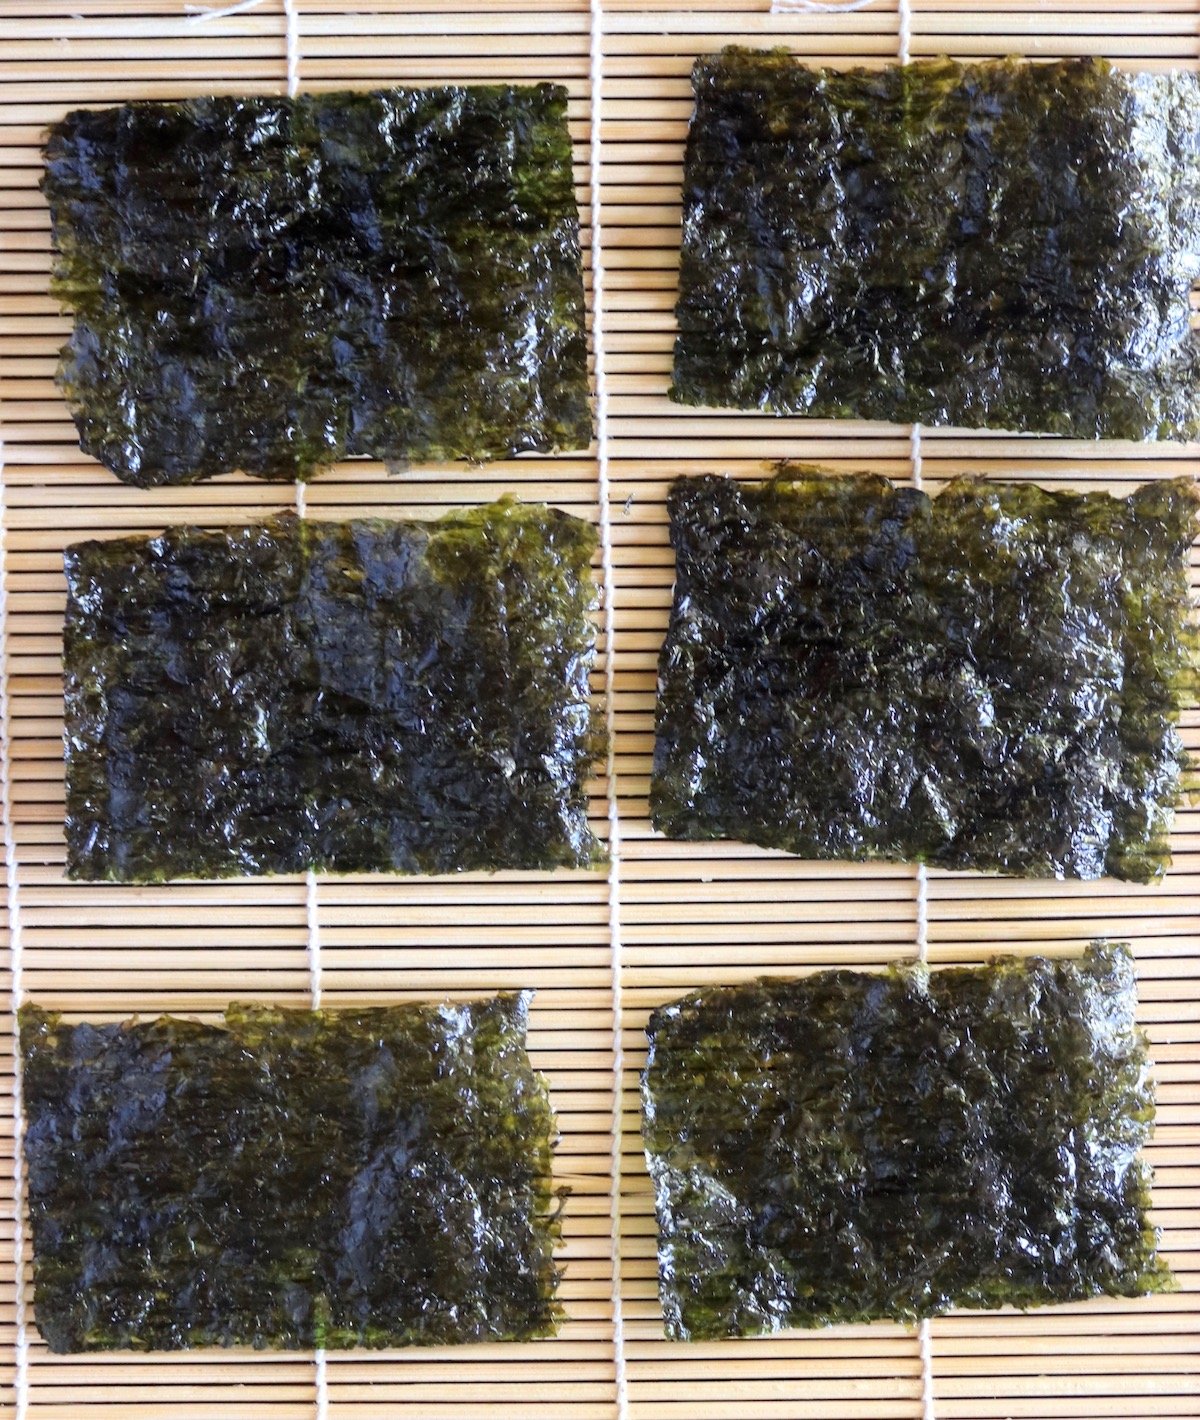 6 snack-sized Nori sheets on a sushi mat.